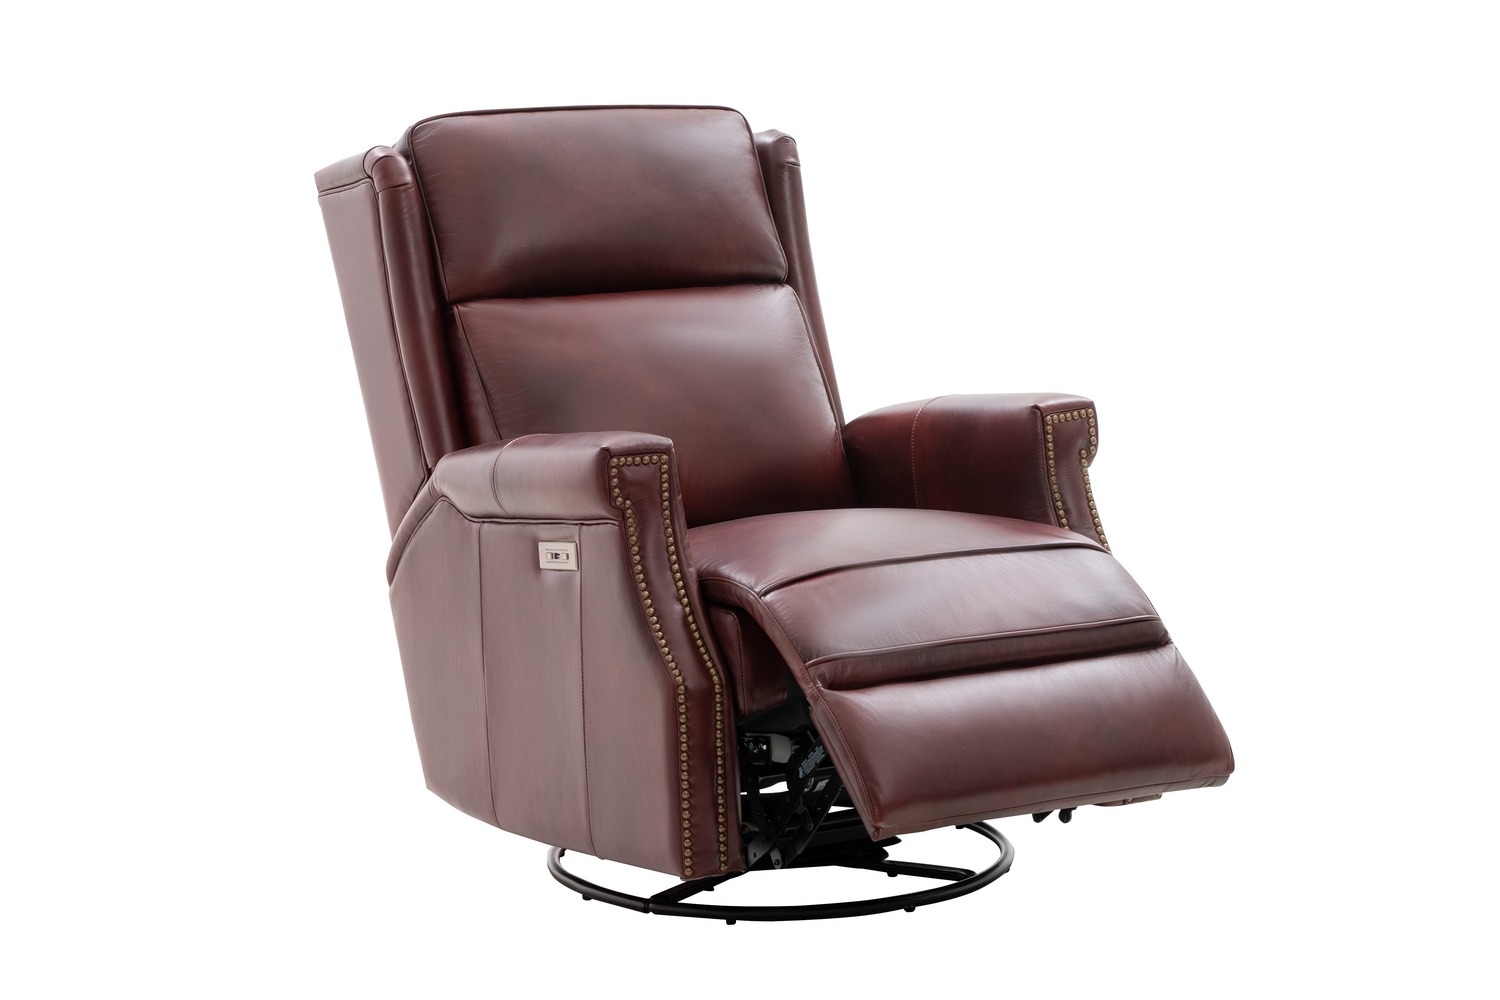 Barcalounger Brookmore Swivel Glider Recliner Chair with Power Recline and Power Head Rest - Emerson Sangria/Top Grain Leather